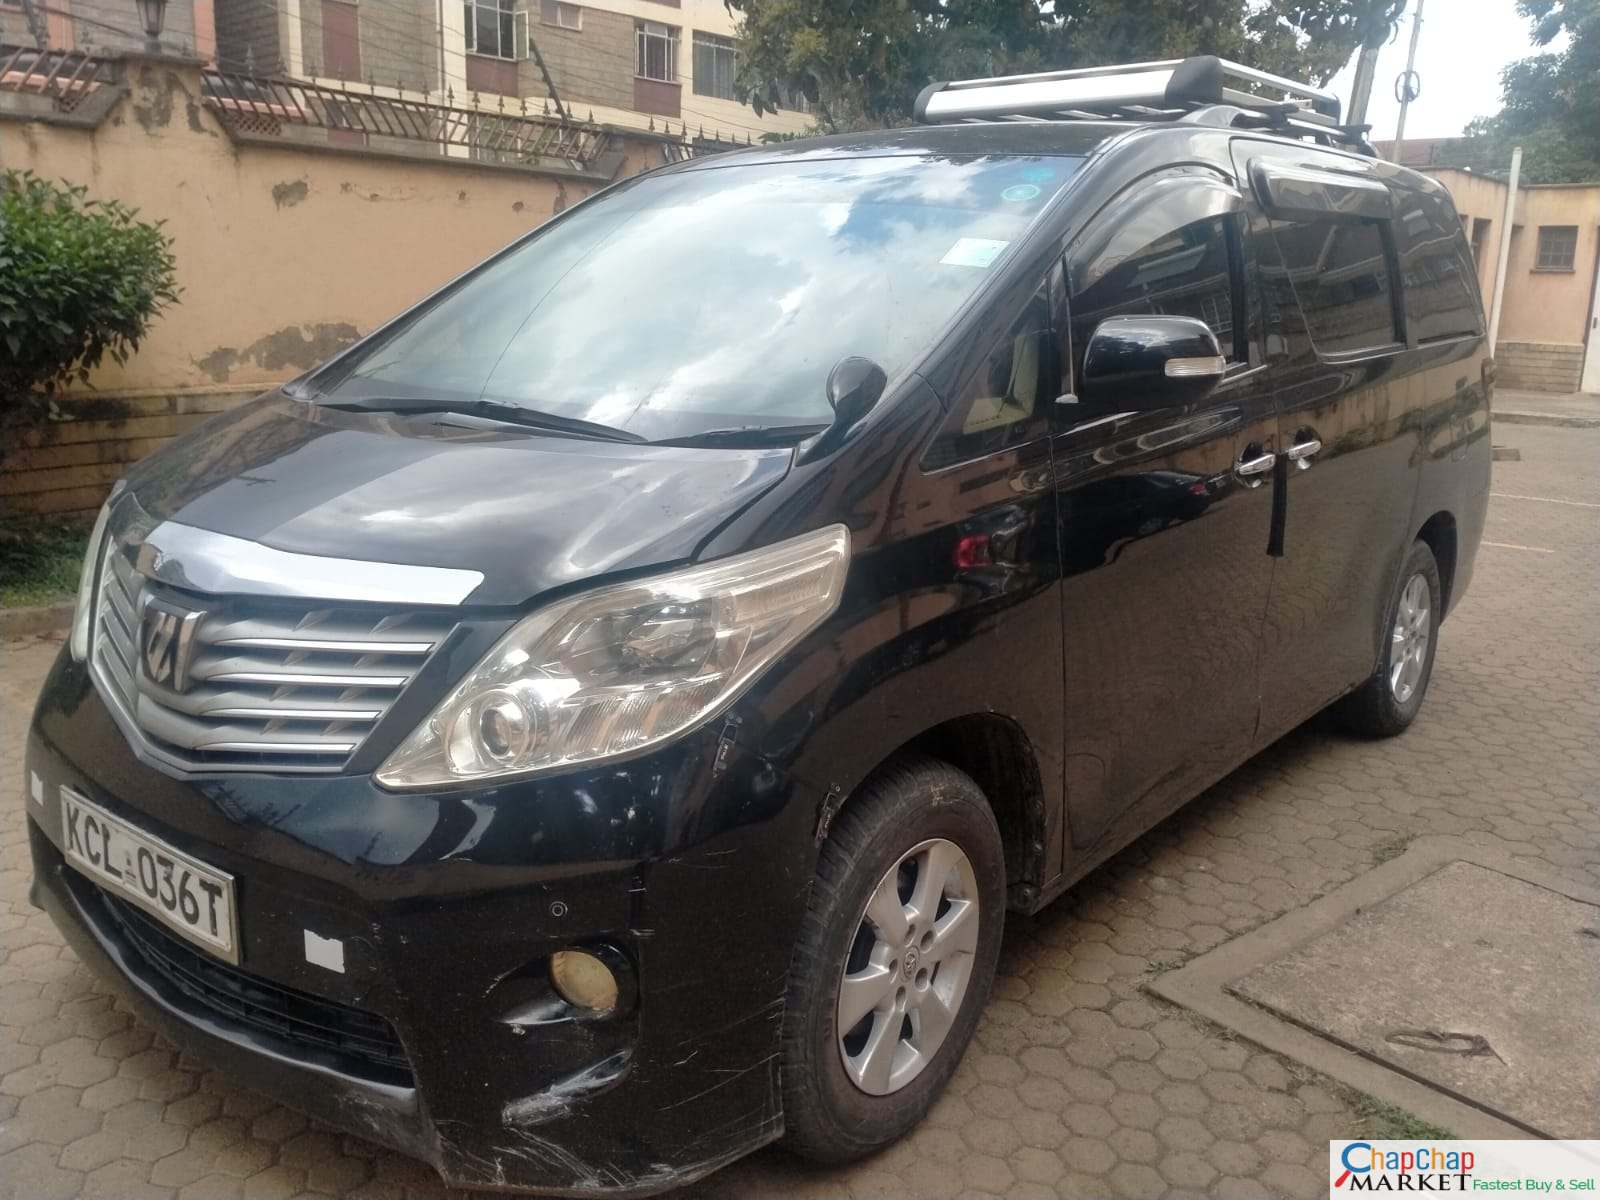 Toyota Alphard Asian Owner You Pay 30% Deposit Trade in OK EXCLUSIVE